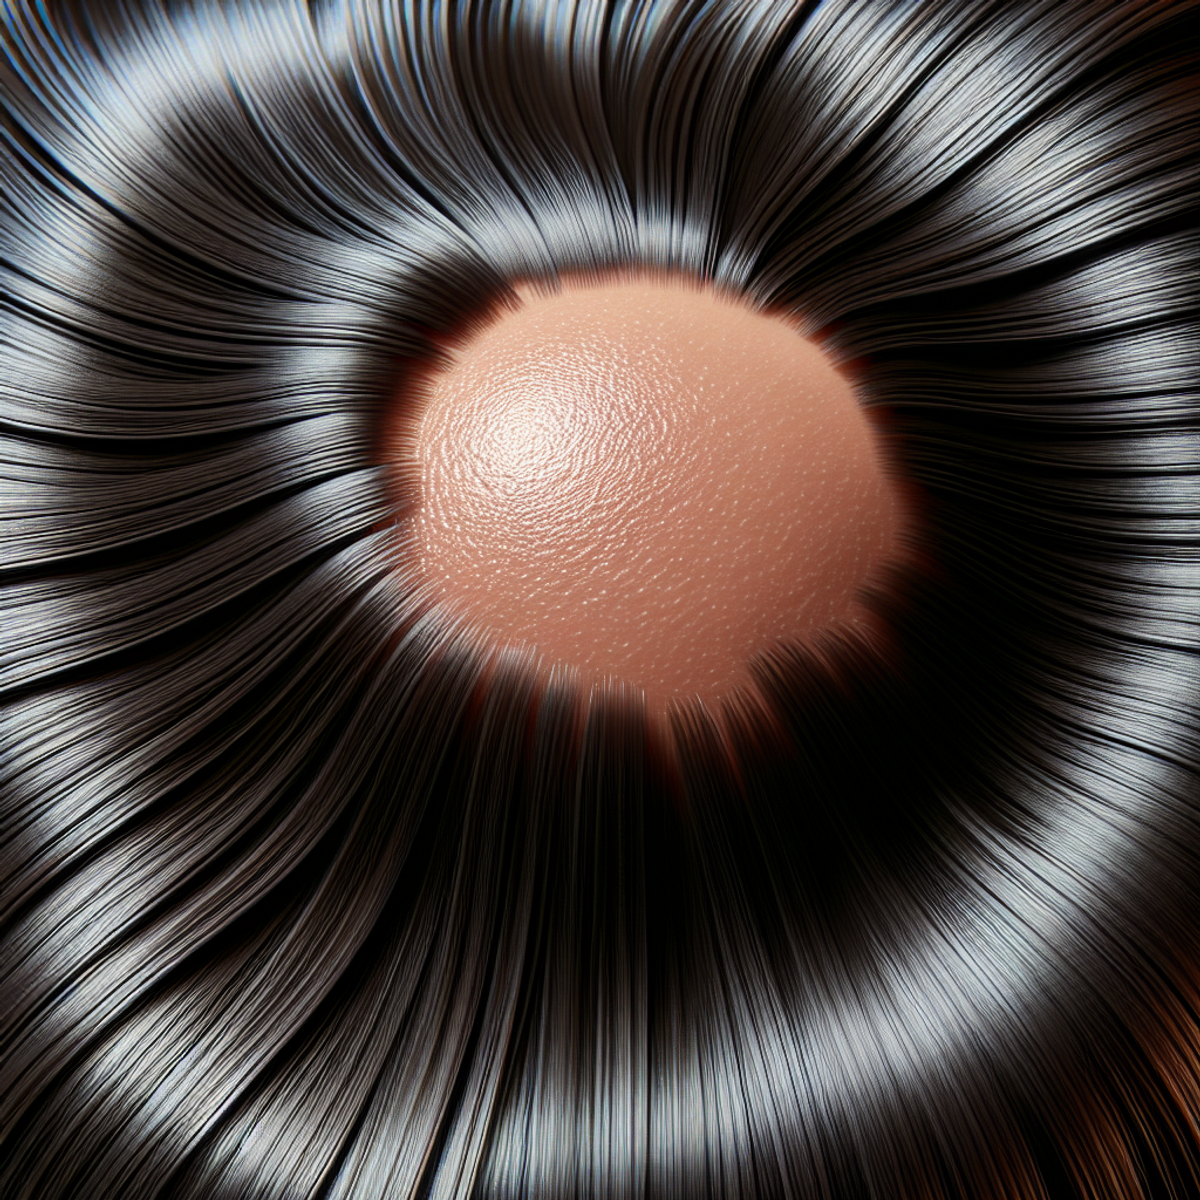 A close-up of a healthy scalp with shiny, smooth hair strands.